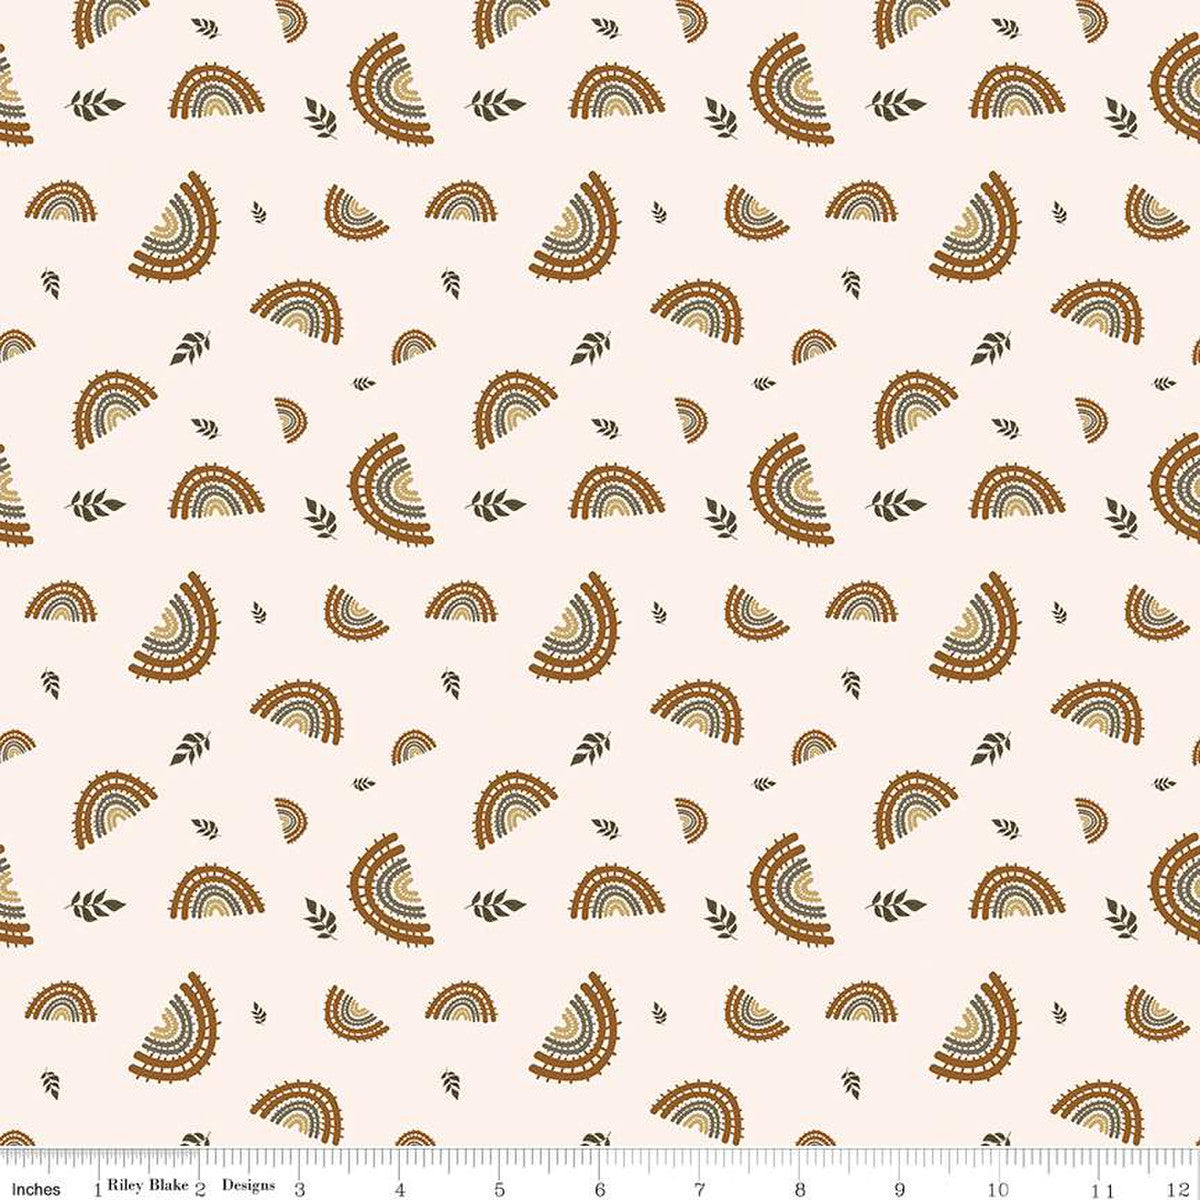 Round the Mountain Railroad Cream Riley Blake Designs outdoorsy earthy rainbow traintracks on creamby Casey Cometti Quilt weight quality cotton fabric